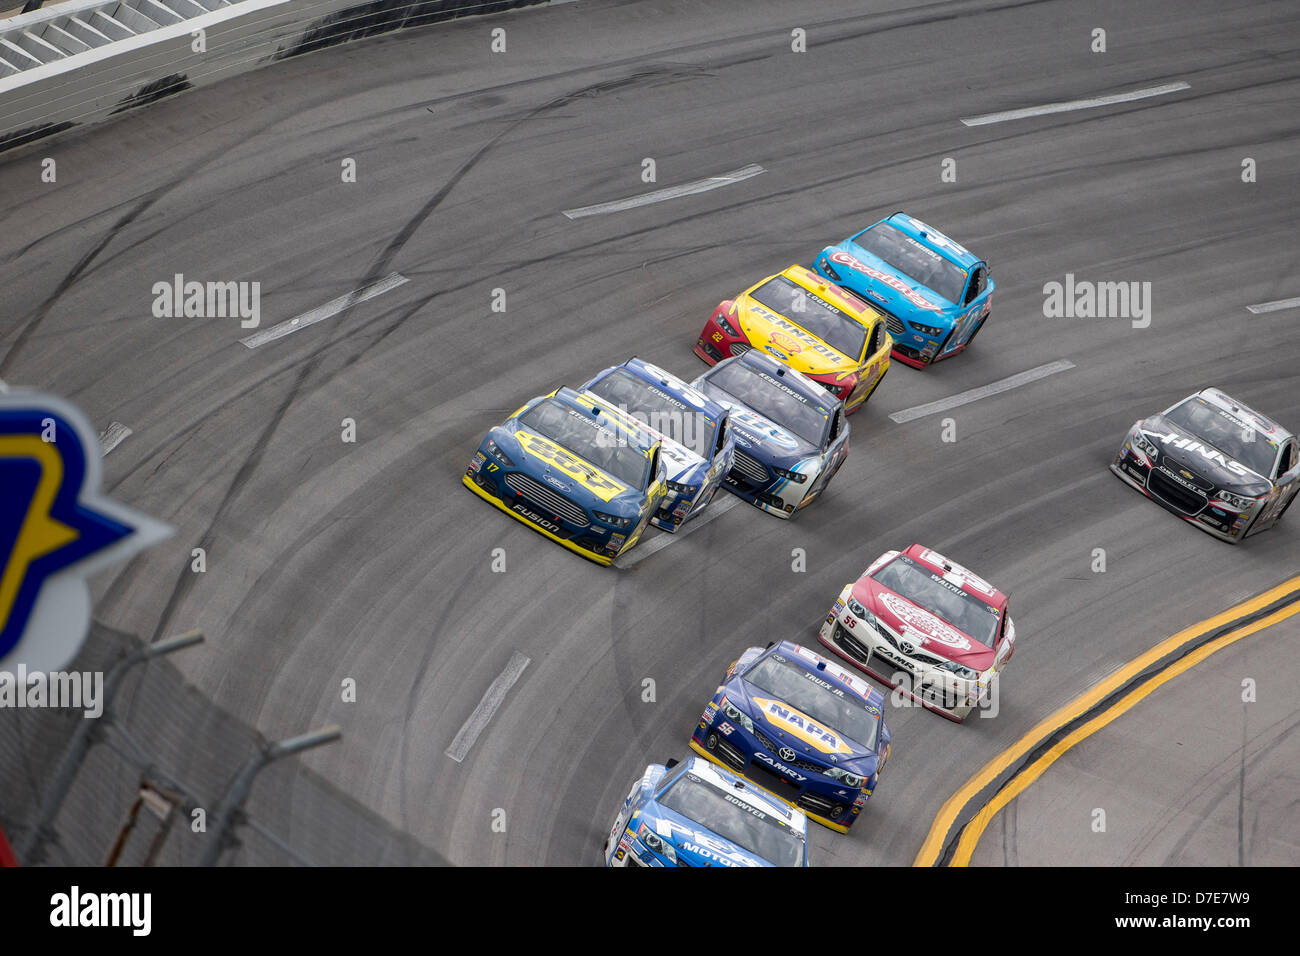 Lincoln, Alabama, USA. 5th May 2013. Ricky Stenhouse, Jr. (17) brings a pack of cars through turn 4 during the Aaron's 499 NACAR Sprint Cup race at the Talladega Superspeedway in Lincoln, AL on May 05, 2013. Credit:  Cal Sport Media / Alamy Live News Stock Photo